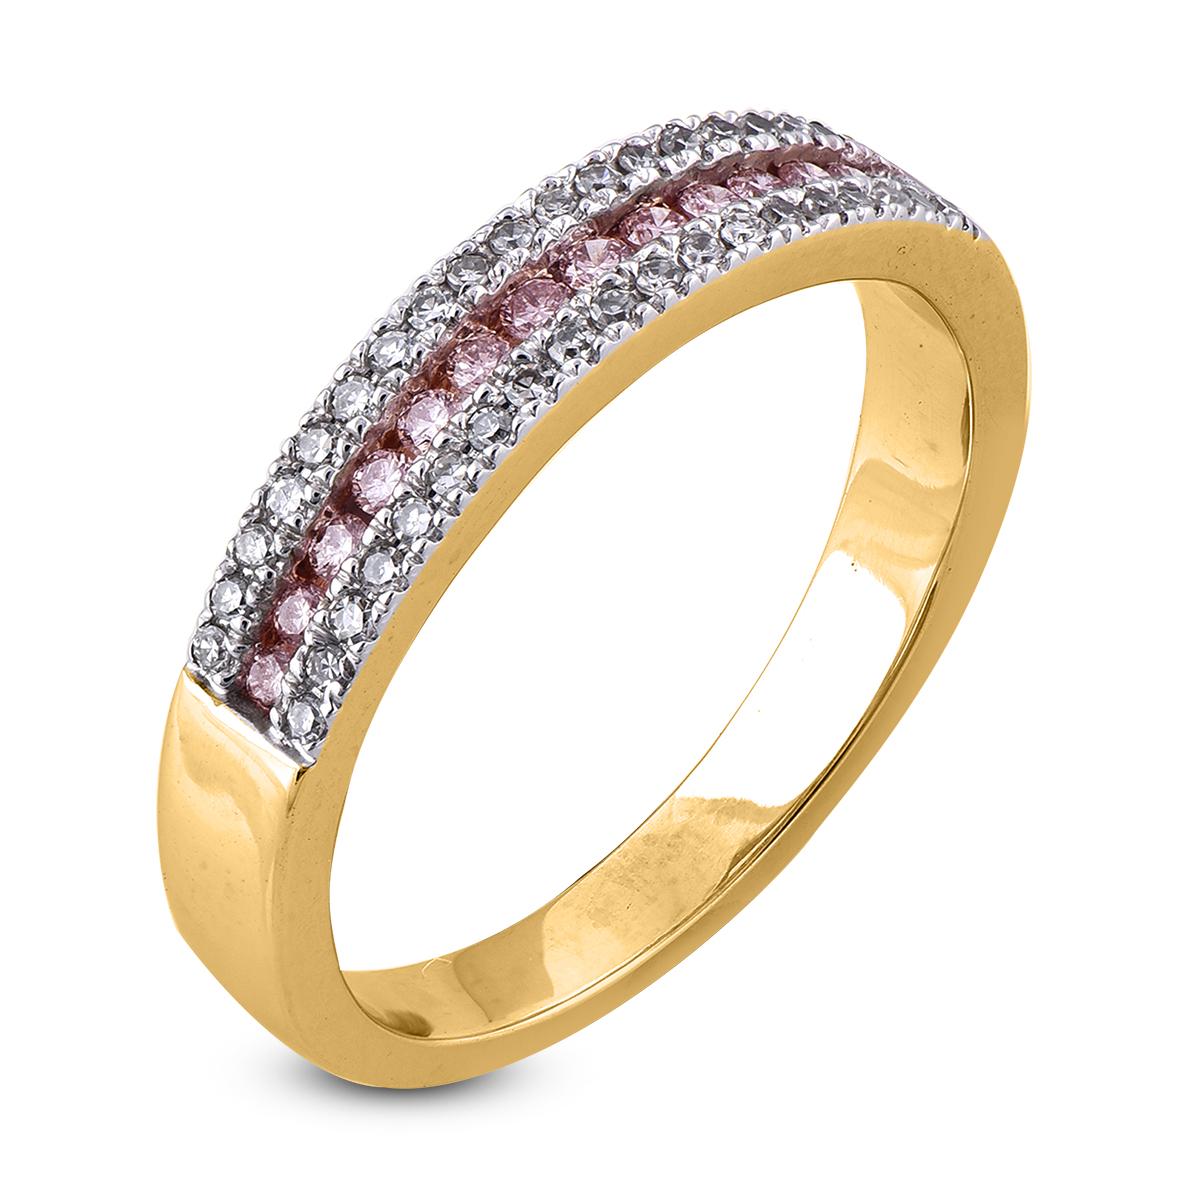 Stunning and classic, this diamond ring is beautifully crafted in 18K Solid yellow gold. The wide band is lined with rows of sparkling 38 round and 14 pink diamonds in secured channel and macro-prong settings. The diamonds are natural, not-treated